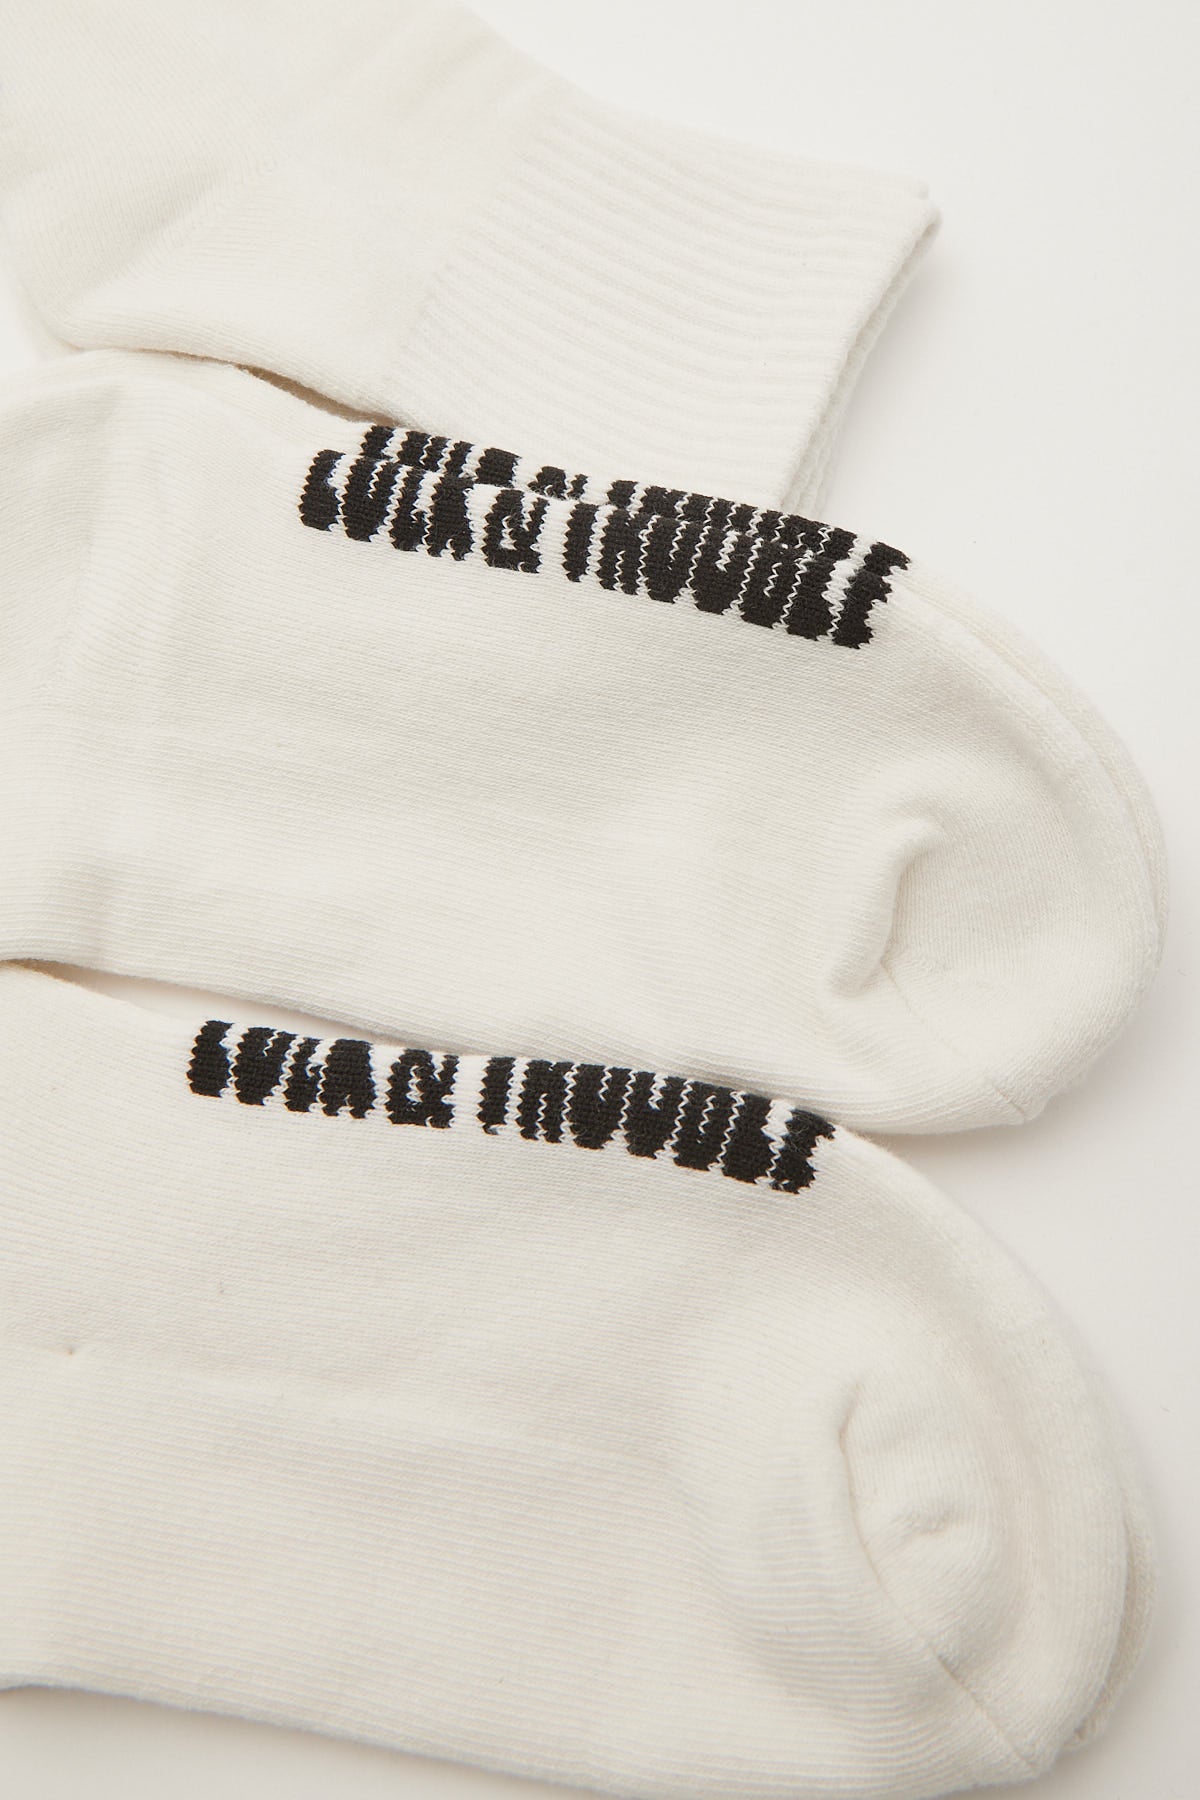 Luck & Trouble Essential Quarter Crew Sock 3 Pack White